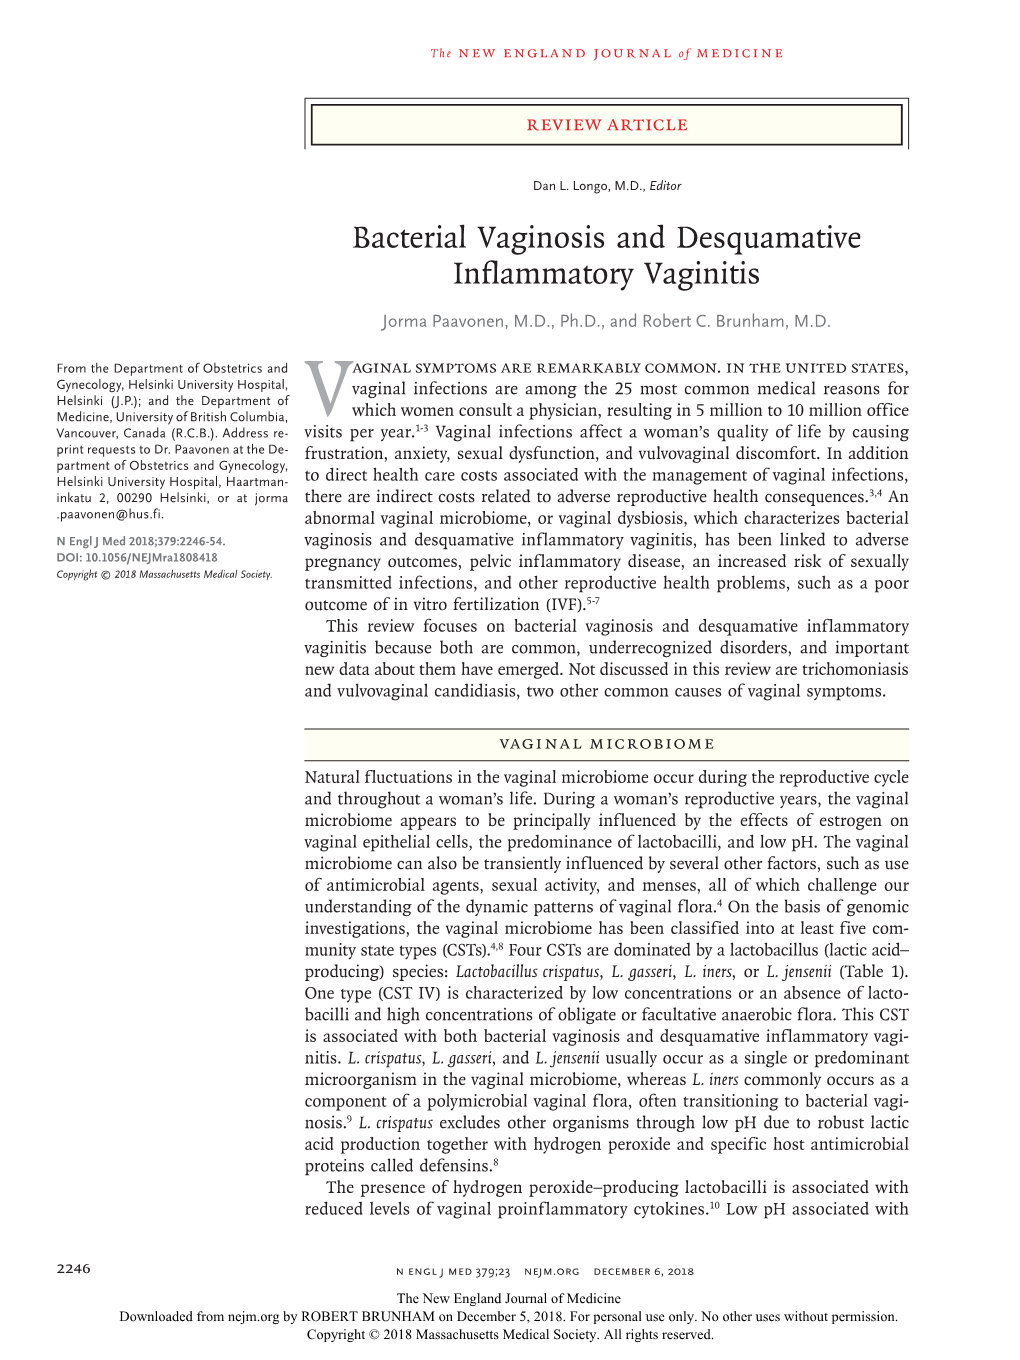 Bacterial Vaginosis and Desquamative Inflammatory Vaginitis